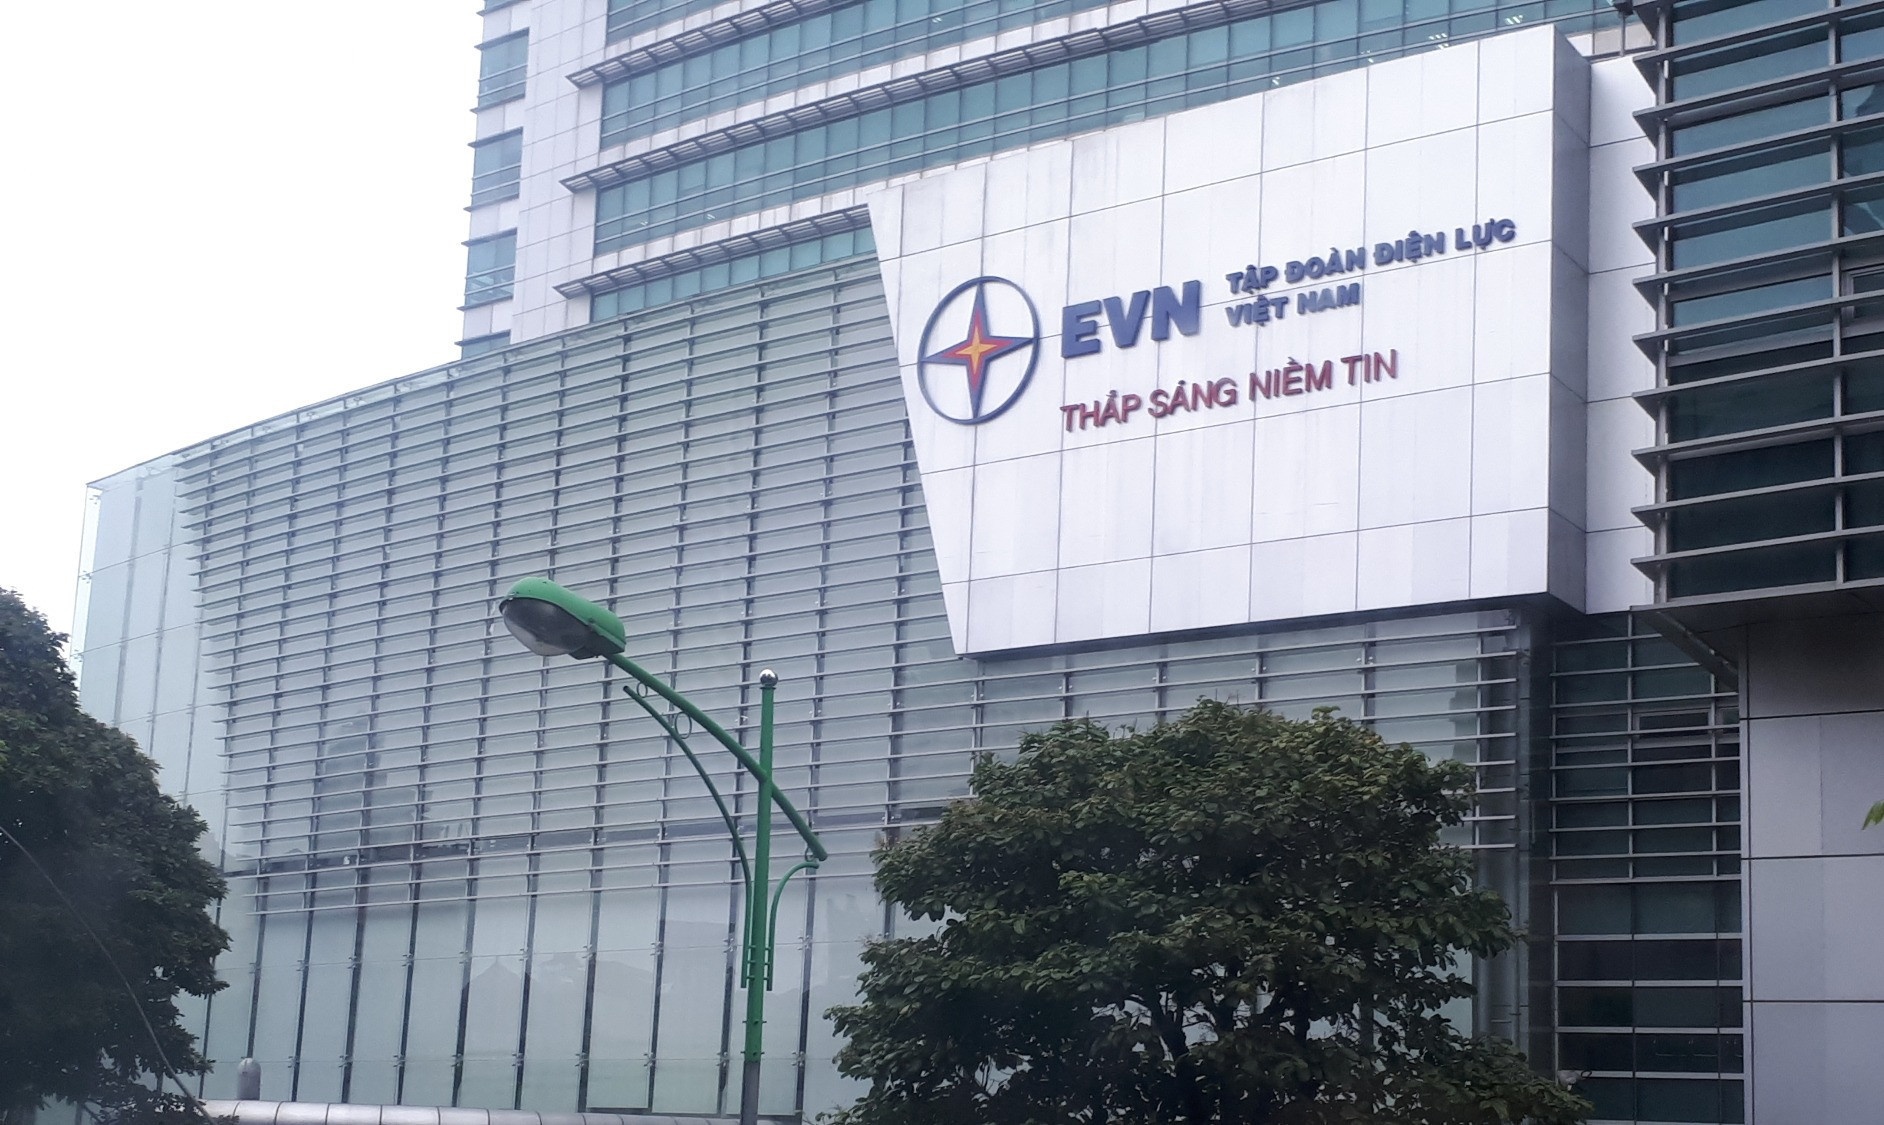 EVN loses electricity monopoly, holding 37 per cent of total system capacity